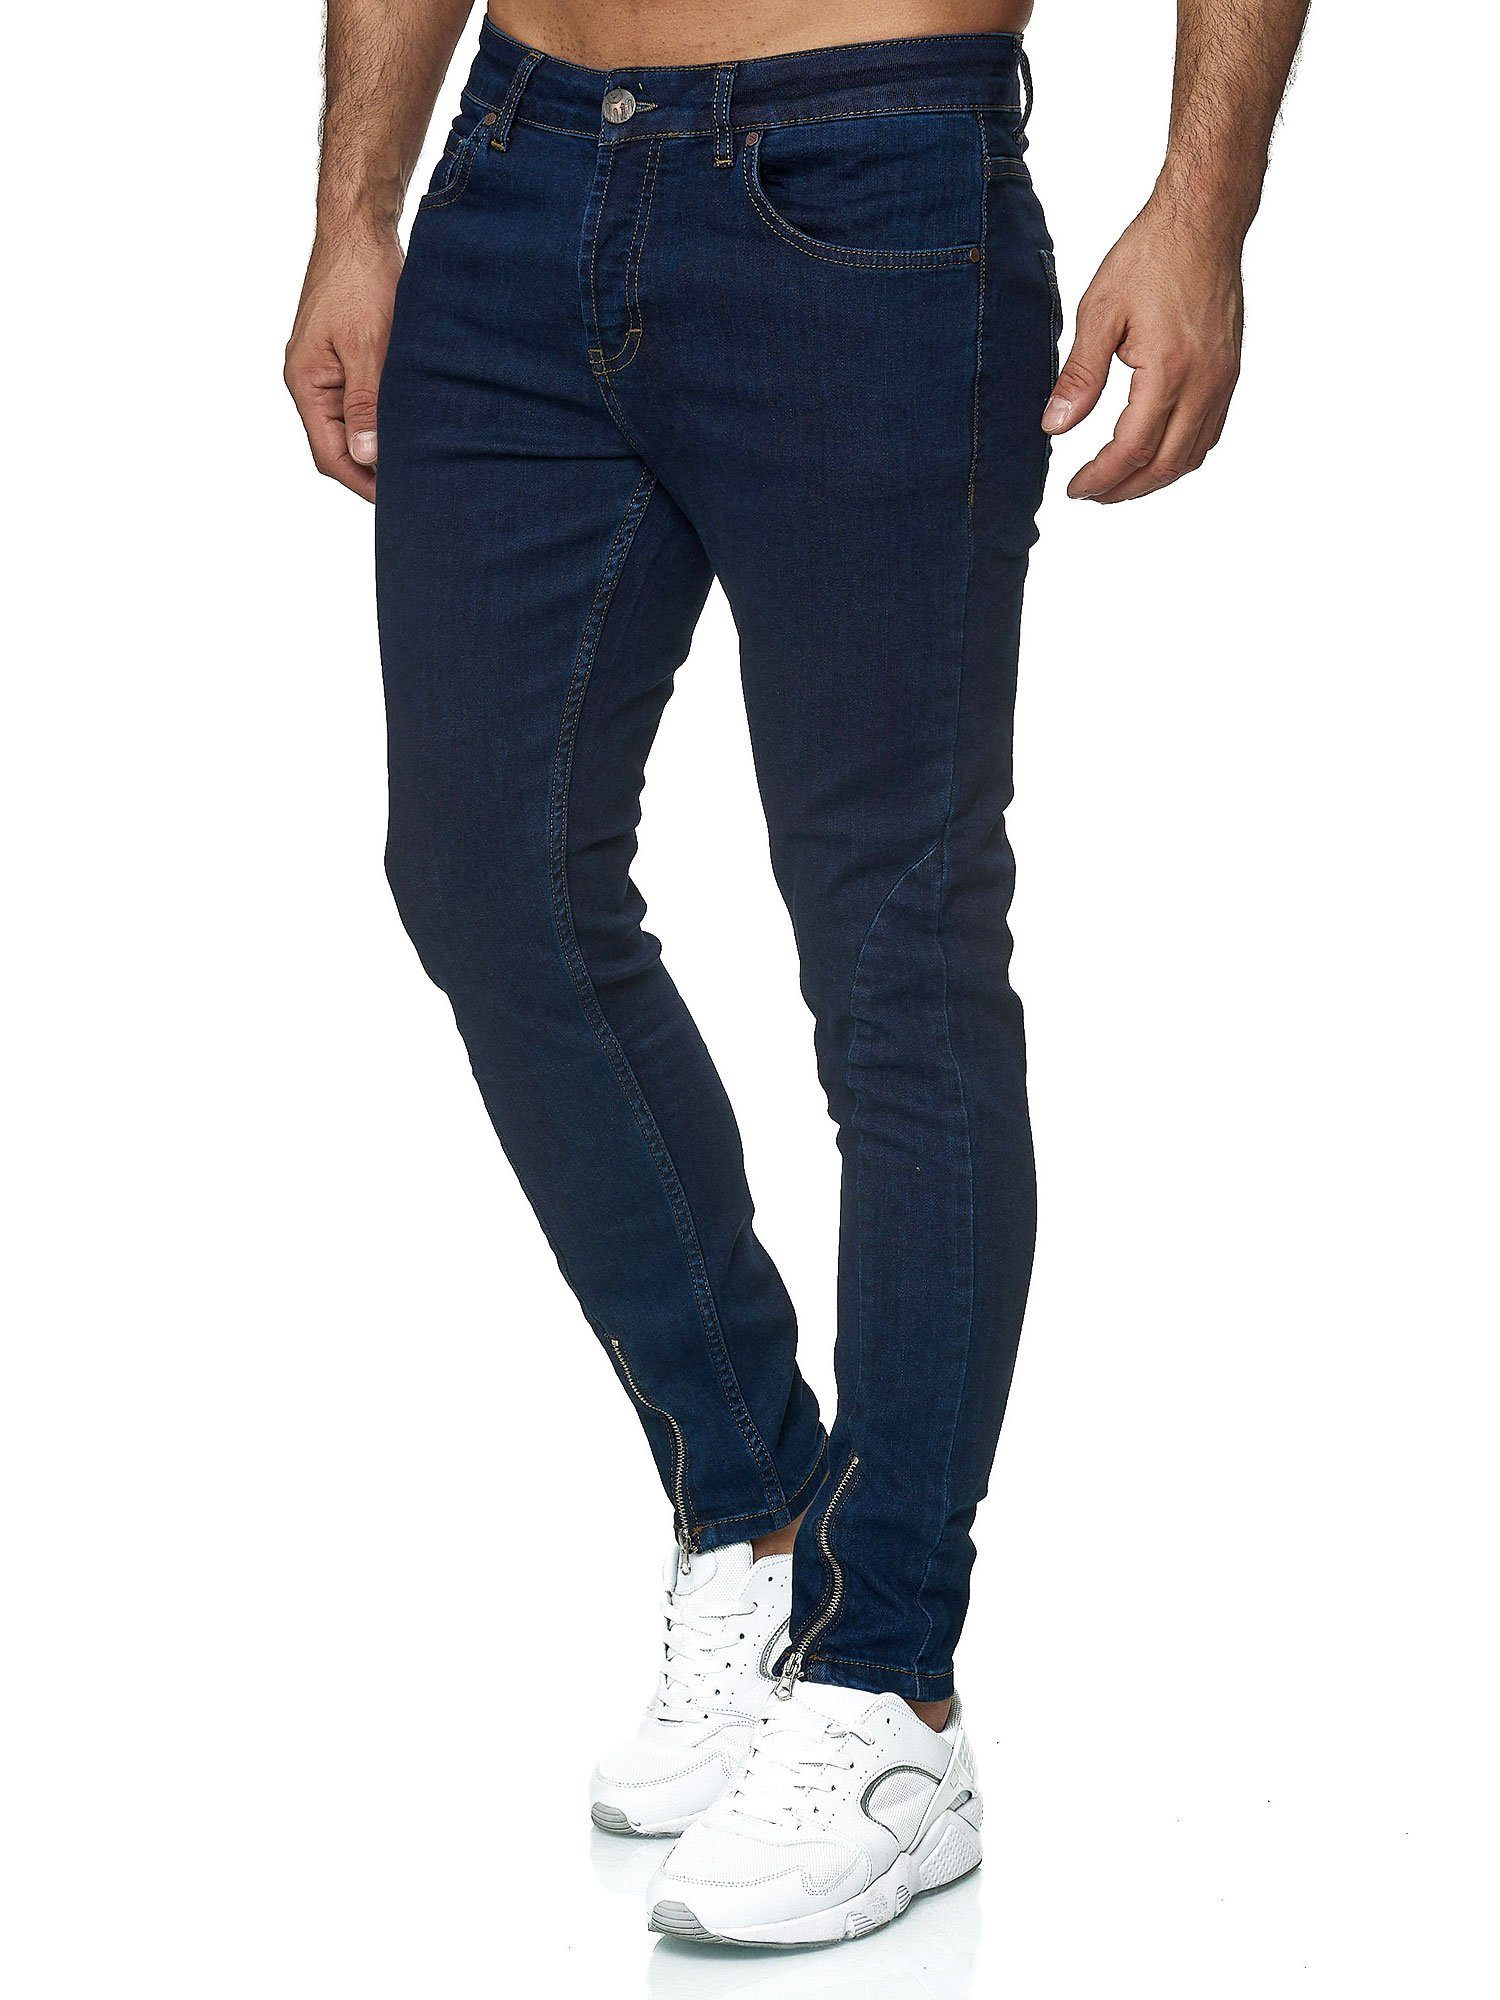 Tazzio Skinny-fit-Jeans 19537 Stretch mit Elasthan | Stretchjeans